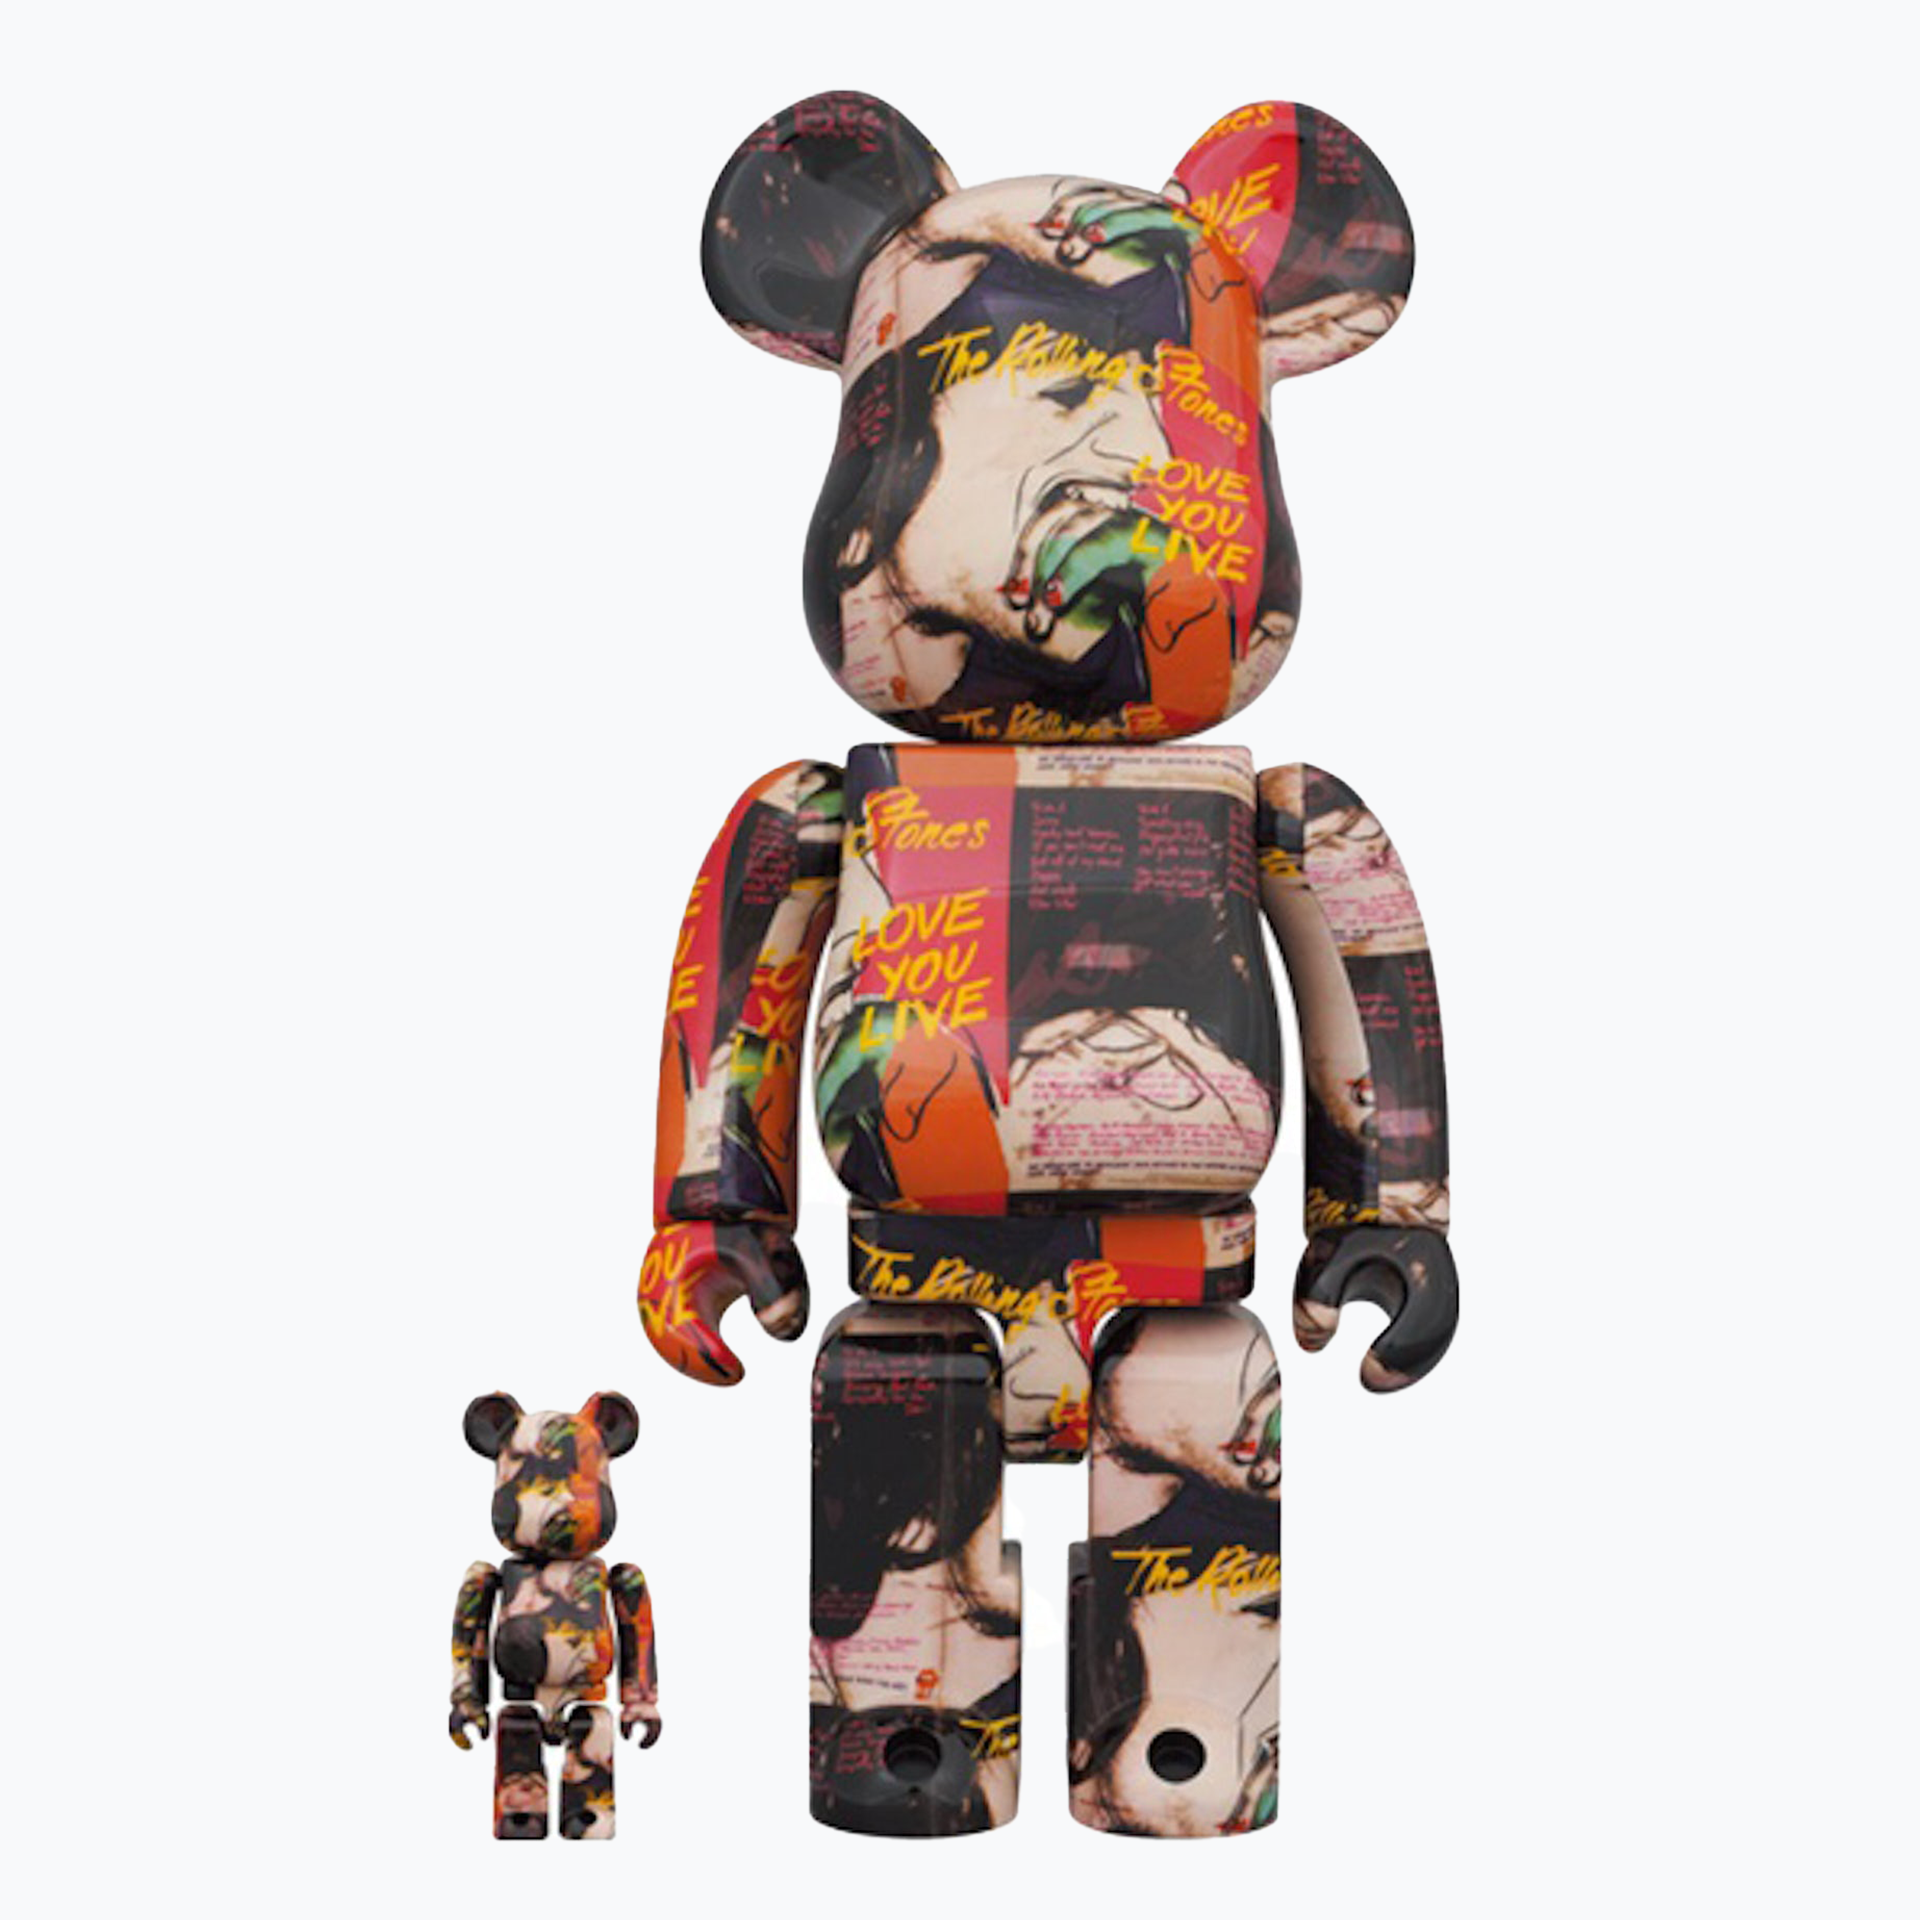 ANDY WARHOL X THE ROLLING STONES LOVE YOU LIVE BE@RBRICK 400% & 100%